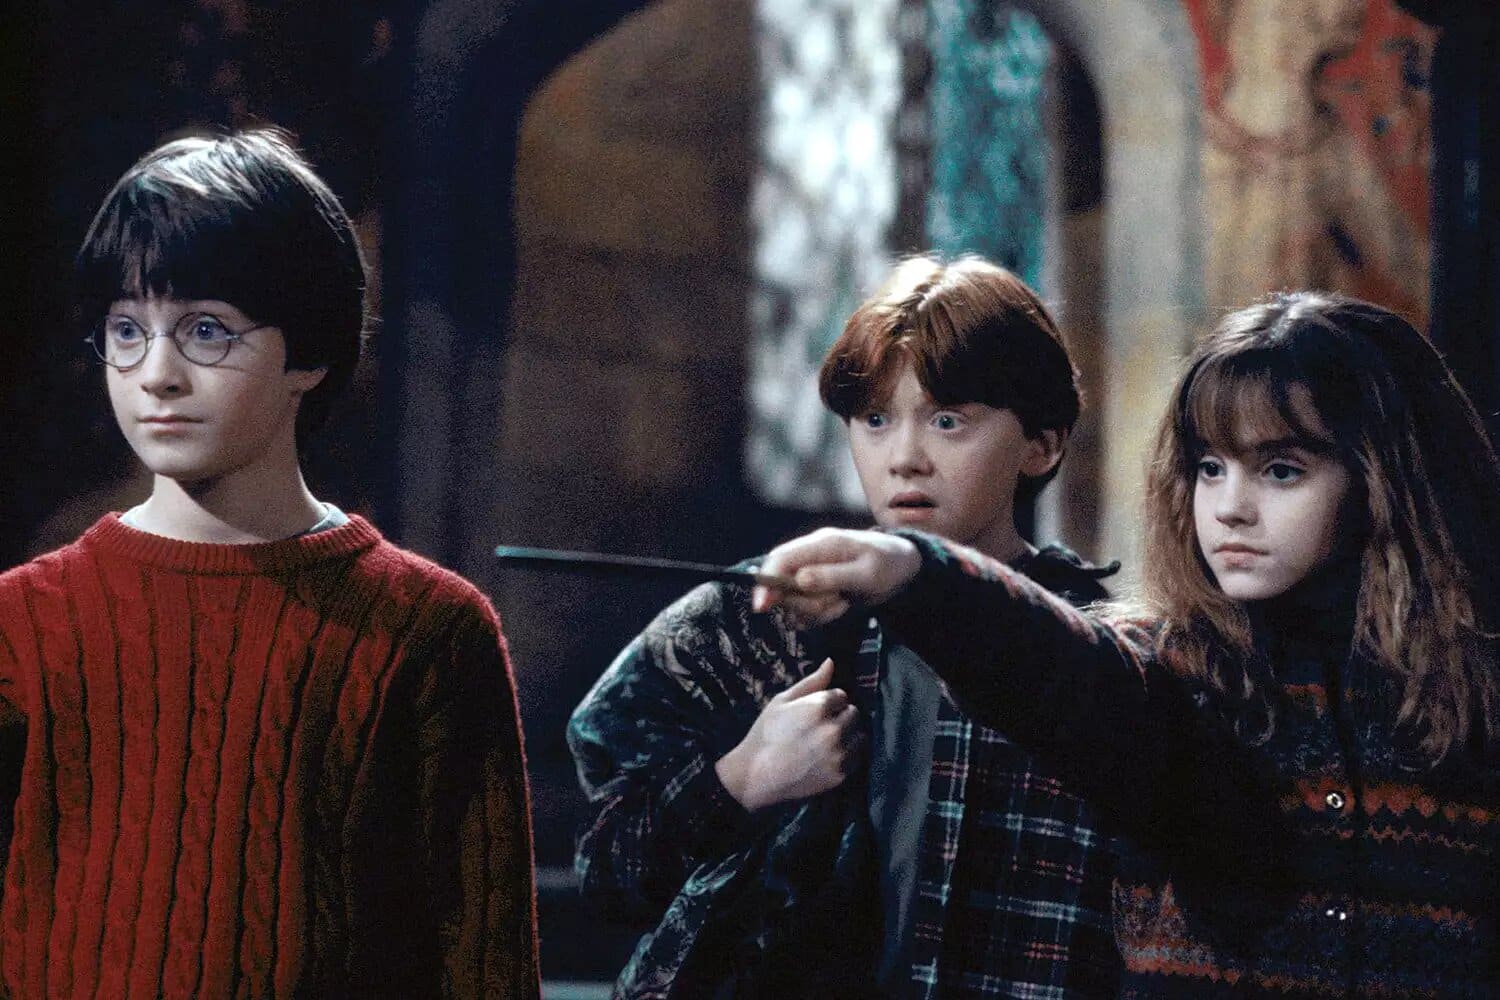 Daniel Radcliffe, Rupert Grint and Emma Watson in Harry Potter and the Philosopher's Stone.